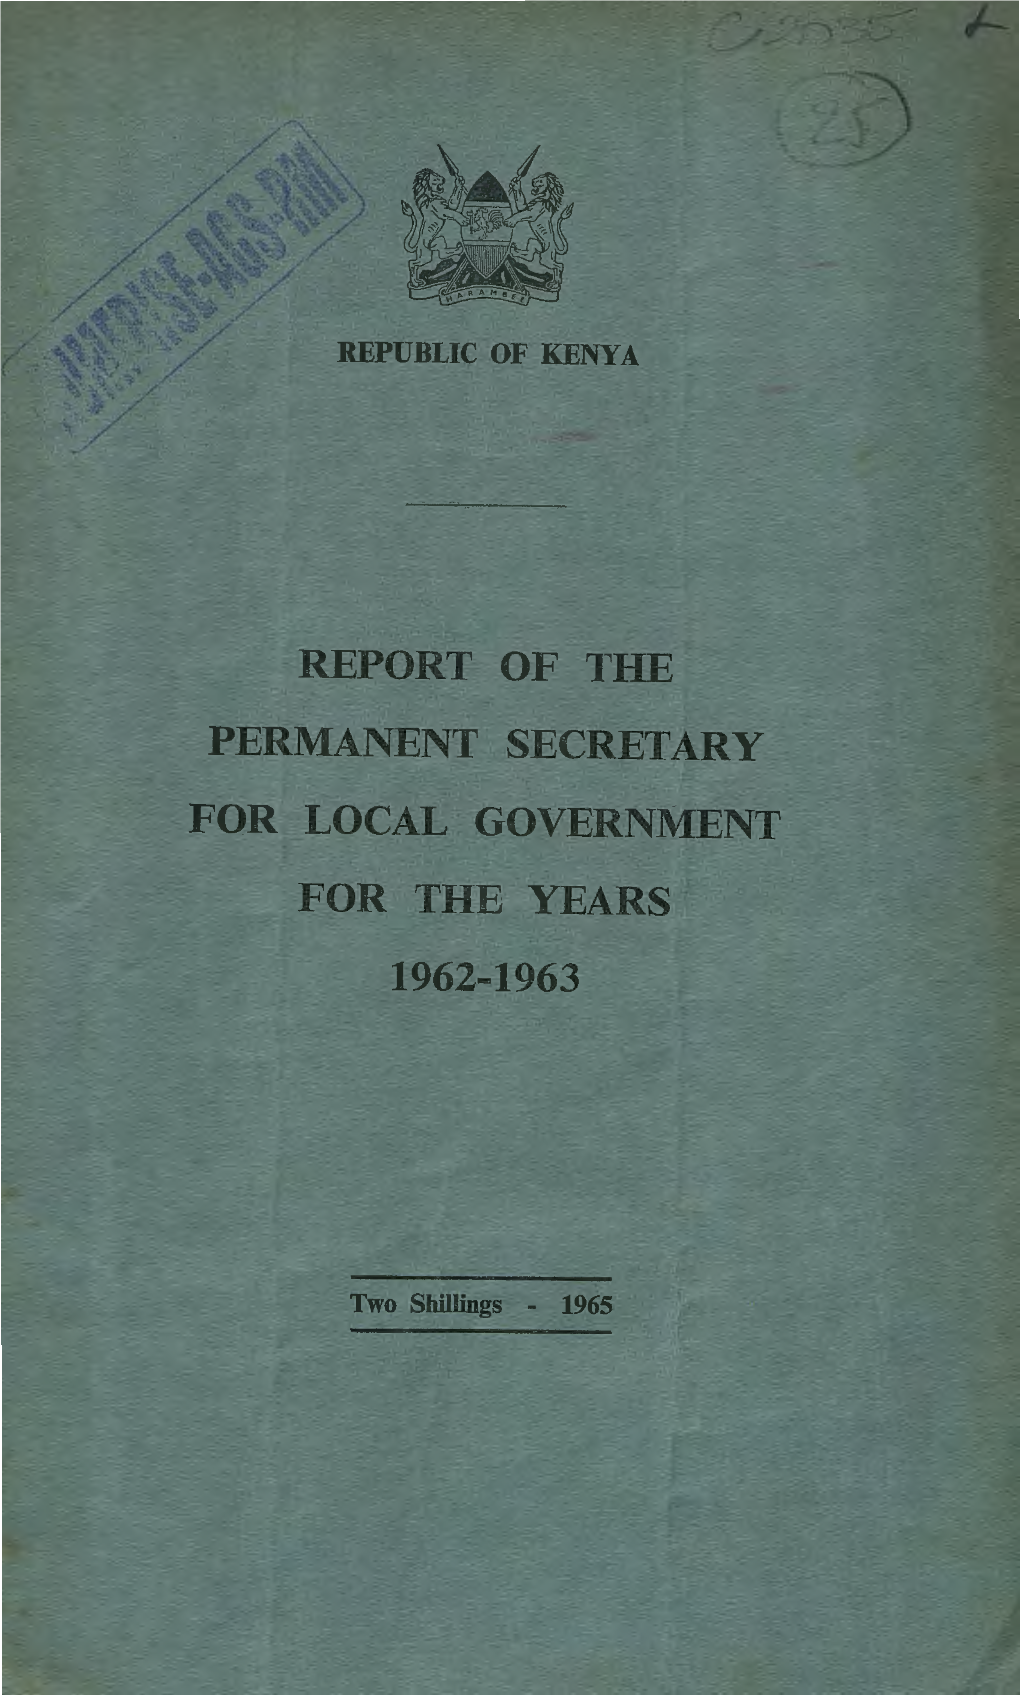 Report of the Permanent Secretary for Local Government for the Years 1962-1963